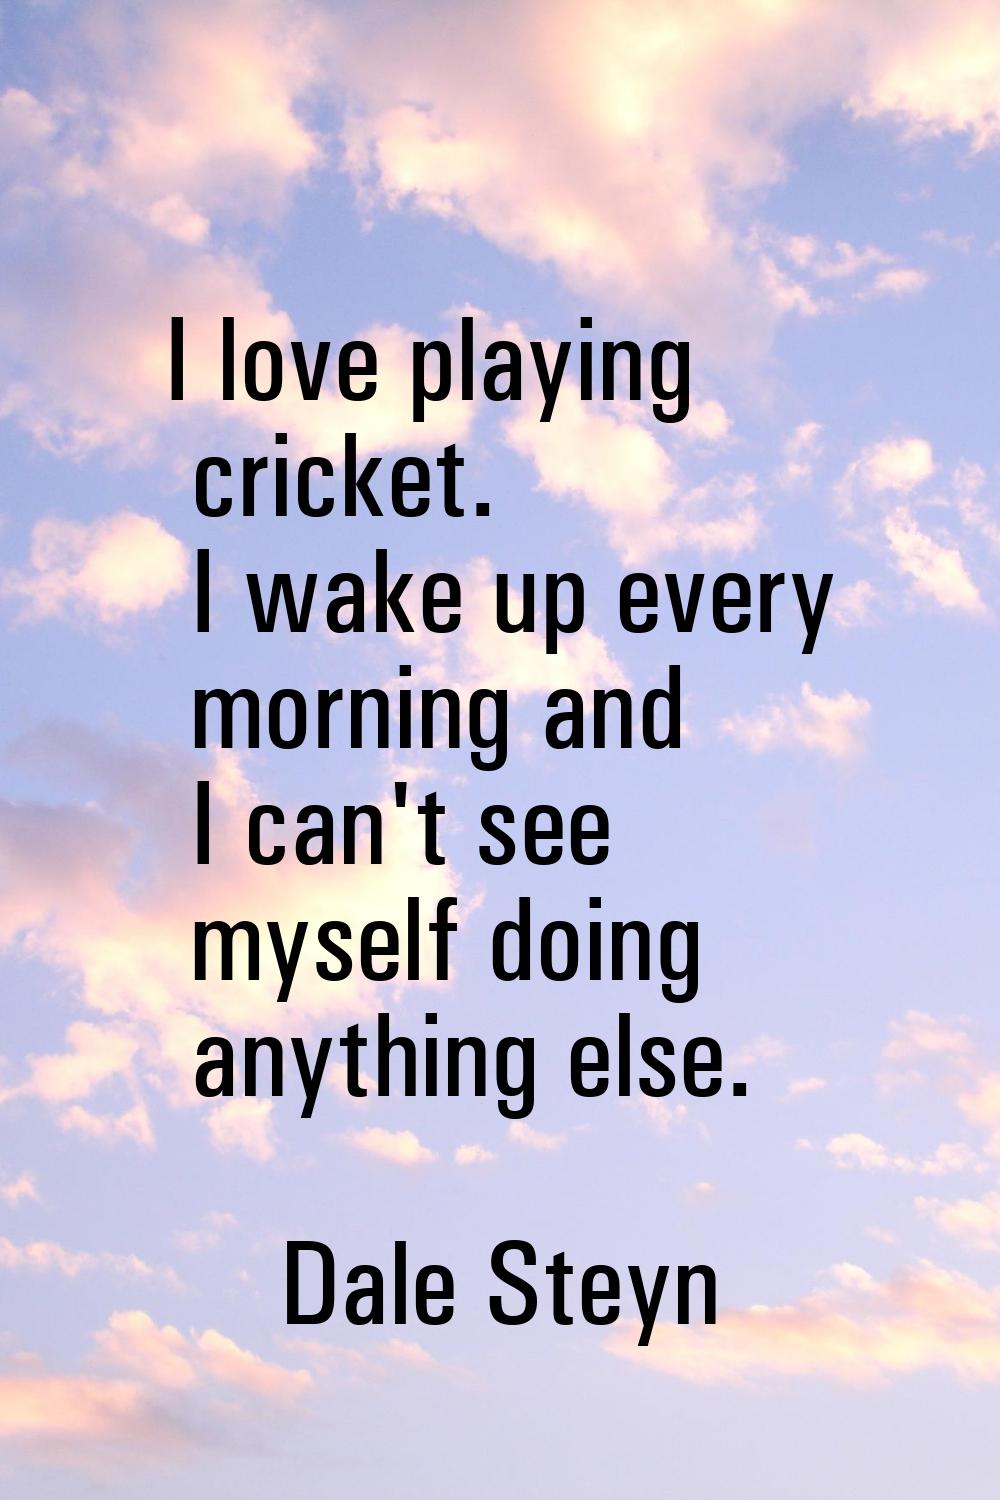 I love playing cricket. I wake up every morning and I can't see myself doing anything else.